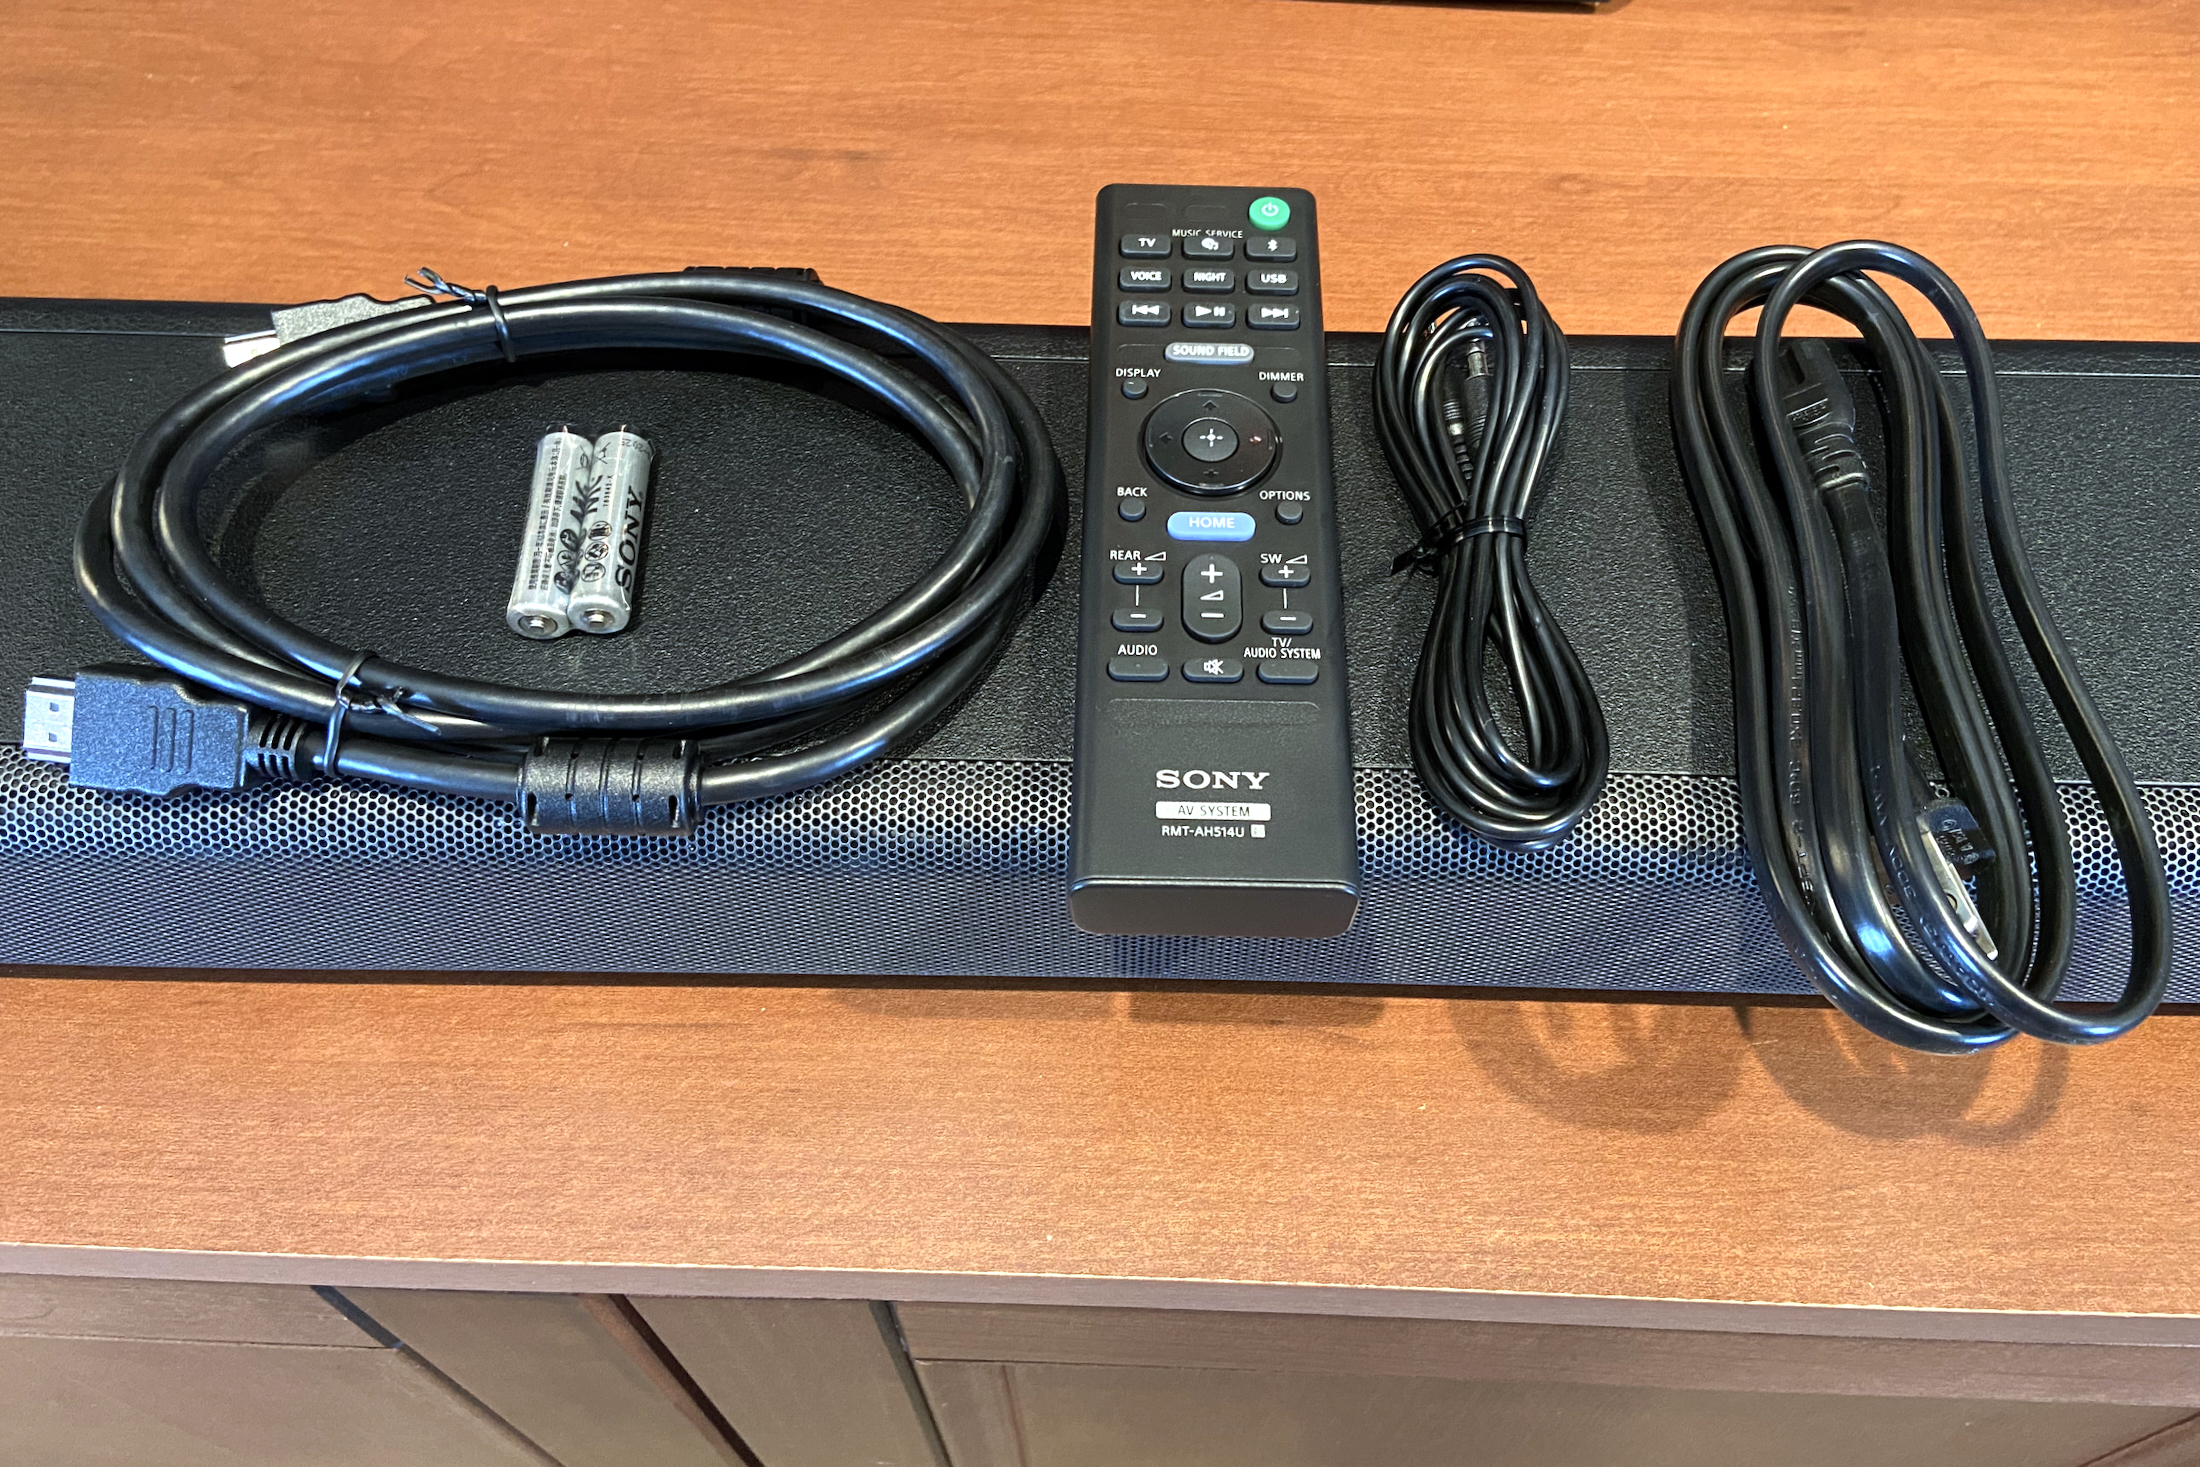 Sony HT-A3000 box contents.